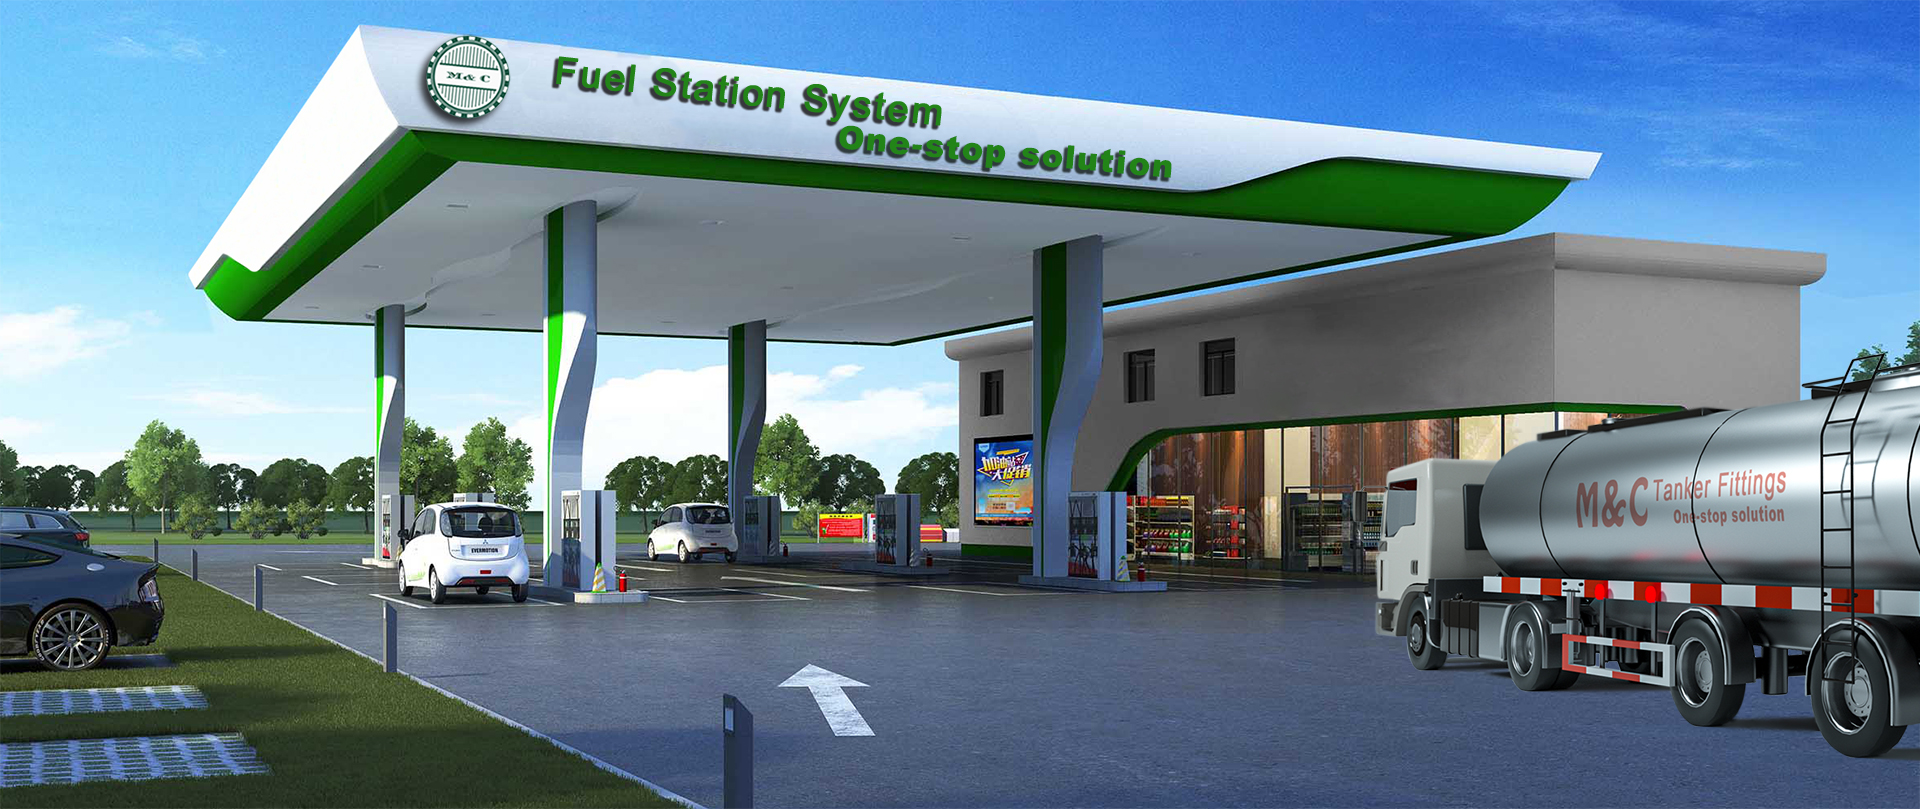 Gas station system related products